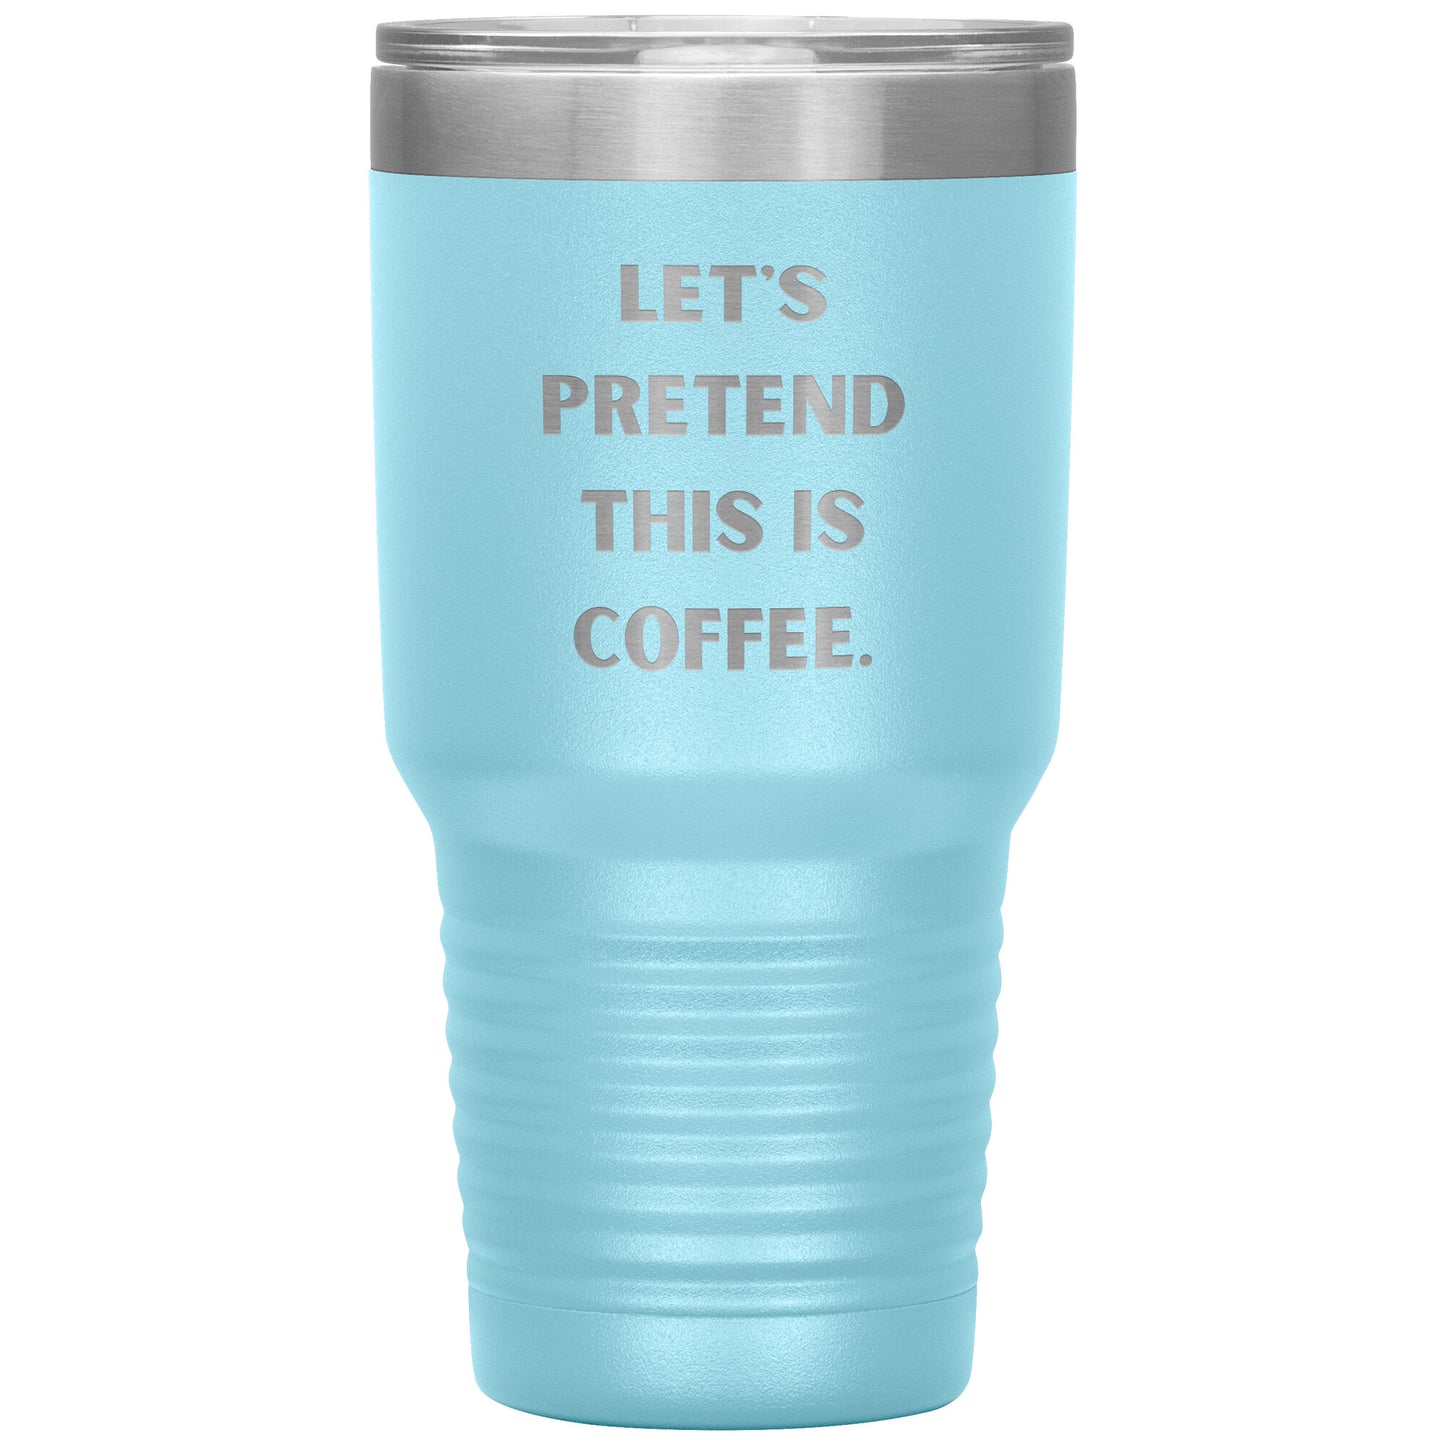 "Let's Pretend This is Coffee" Durable, Insulated 30 oz. Tumbler